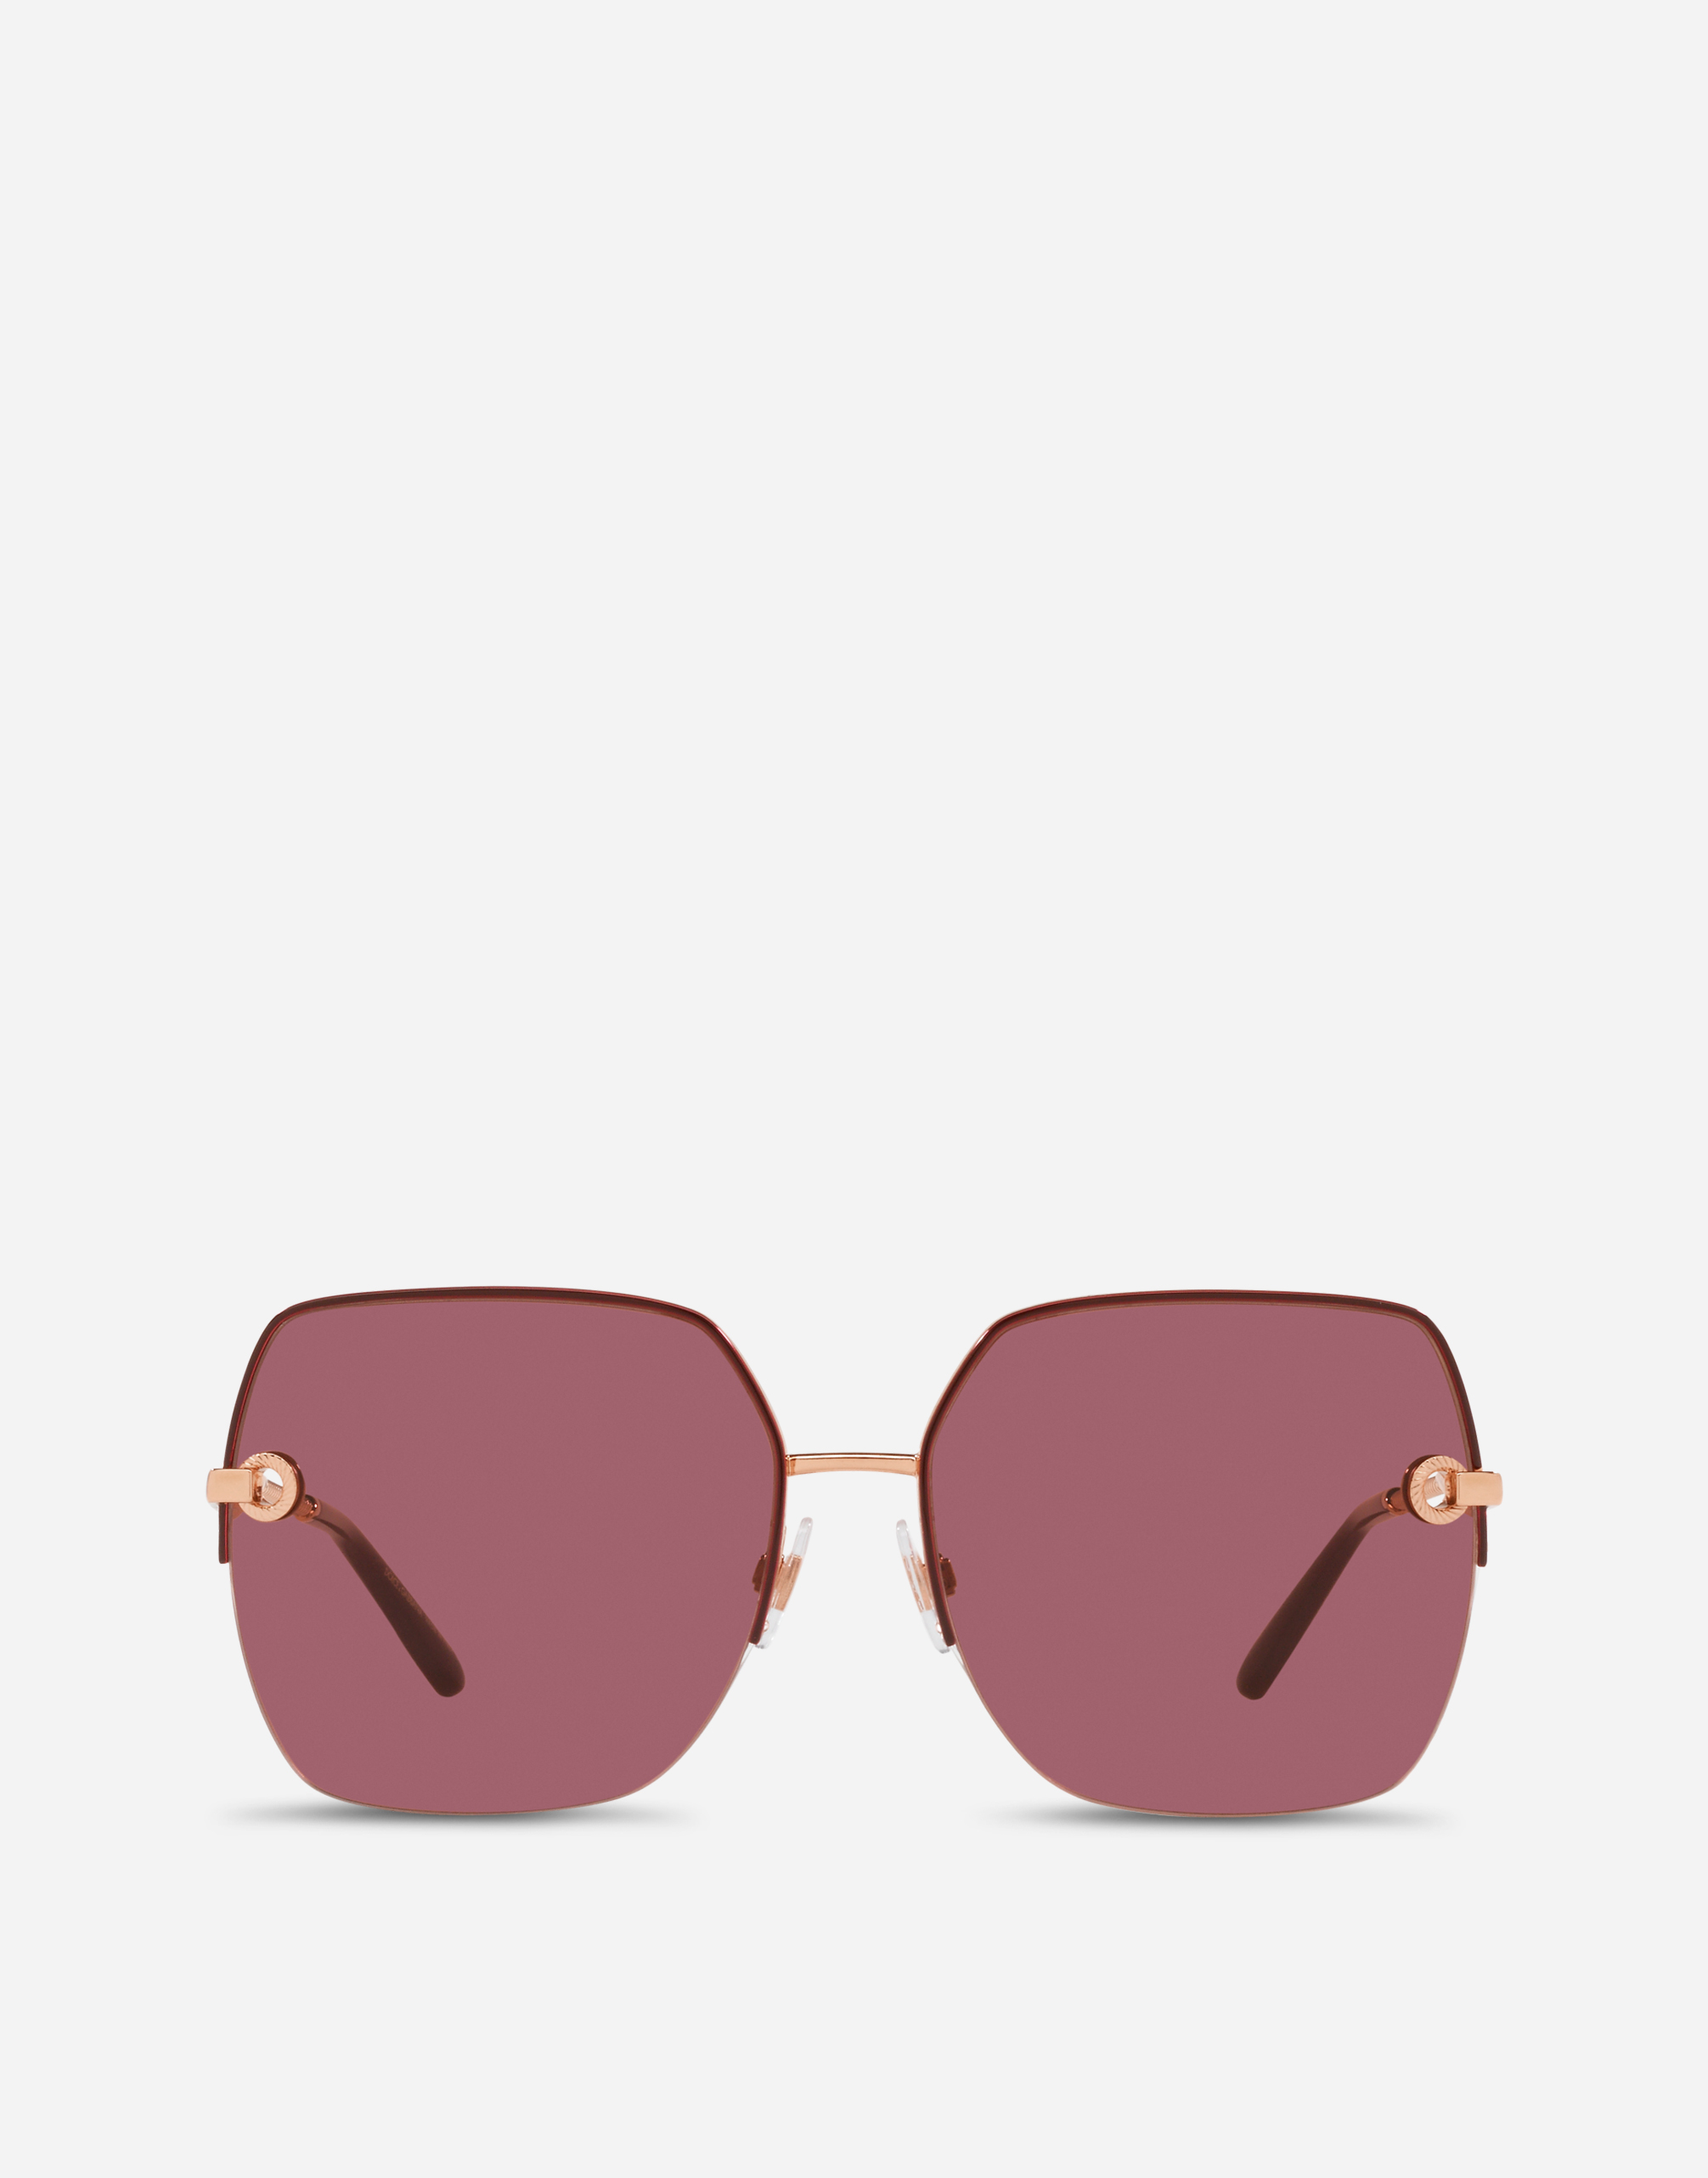 DG Amore sunglasses in Pink Gold